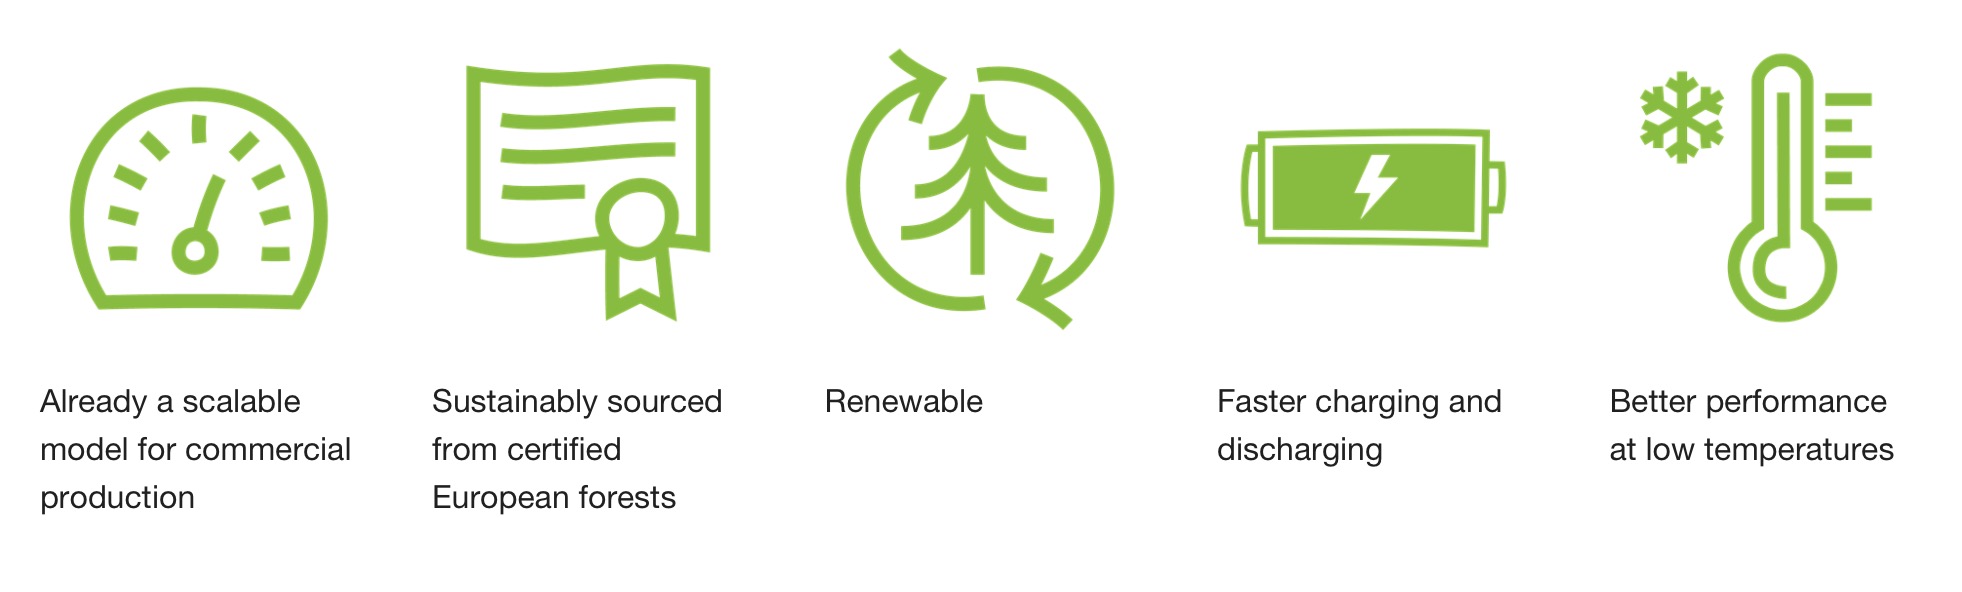 1) Already a scalable model for commercial production. 2) Sustainably sourced from certified European forests. 3)Renewable. 4) Faster charging and discharging. 5) Better performance at low temperatures.